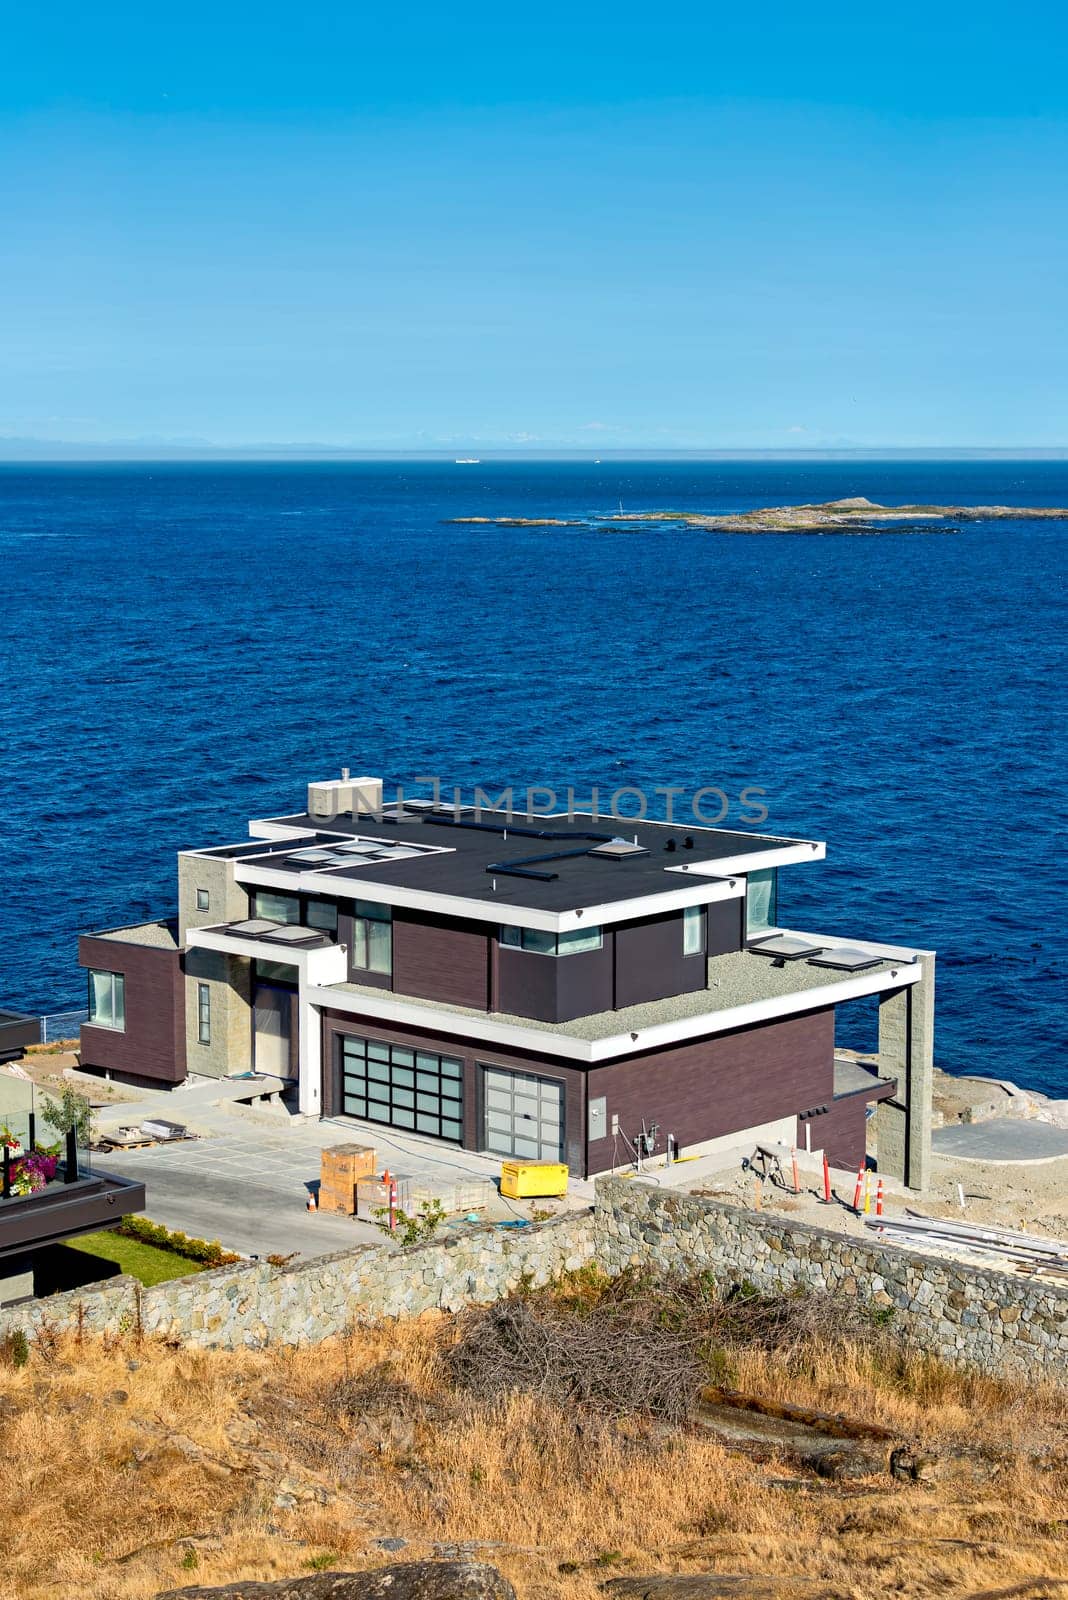 A perfect neighborhood. New luxury residential house on Pacific ocean shore by Imagenet